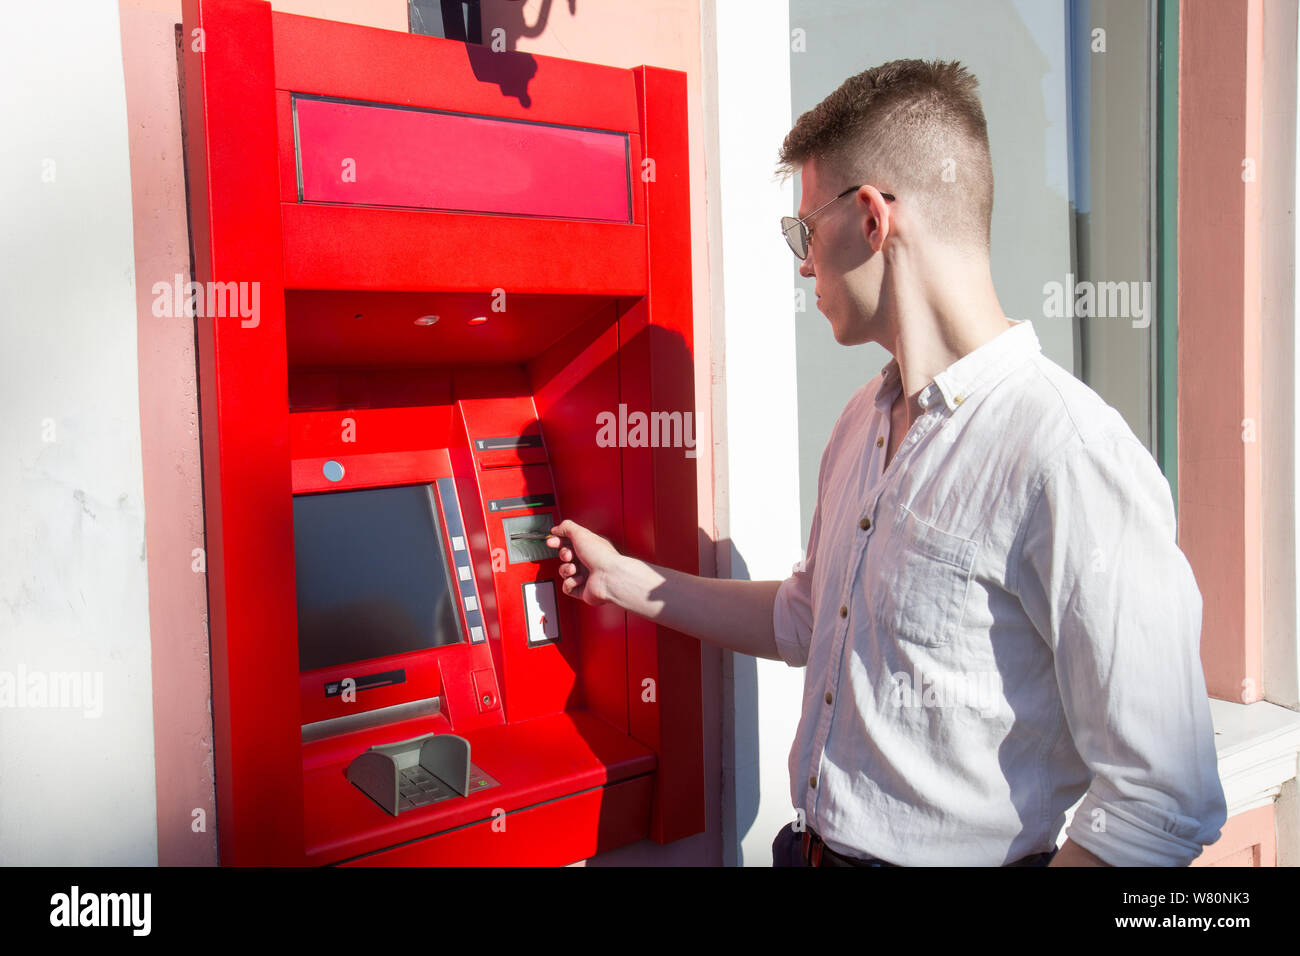 young man student withdrawing money from a bank cash point, outdoors Stock Photo